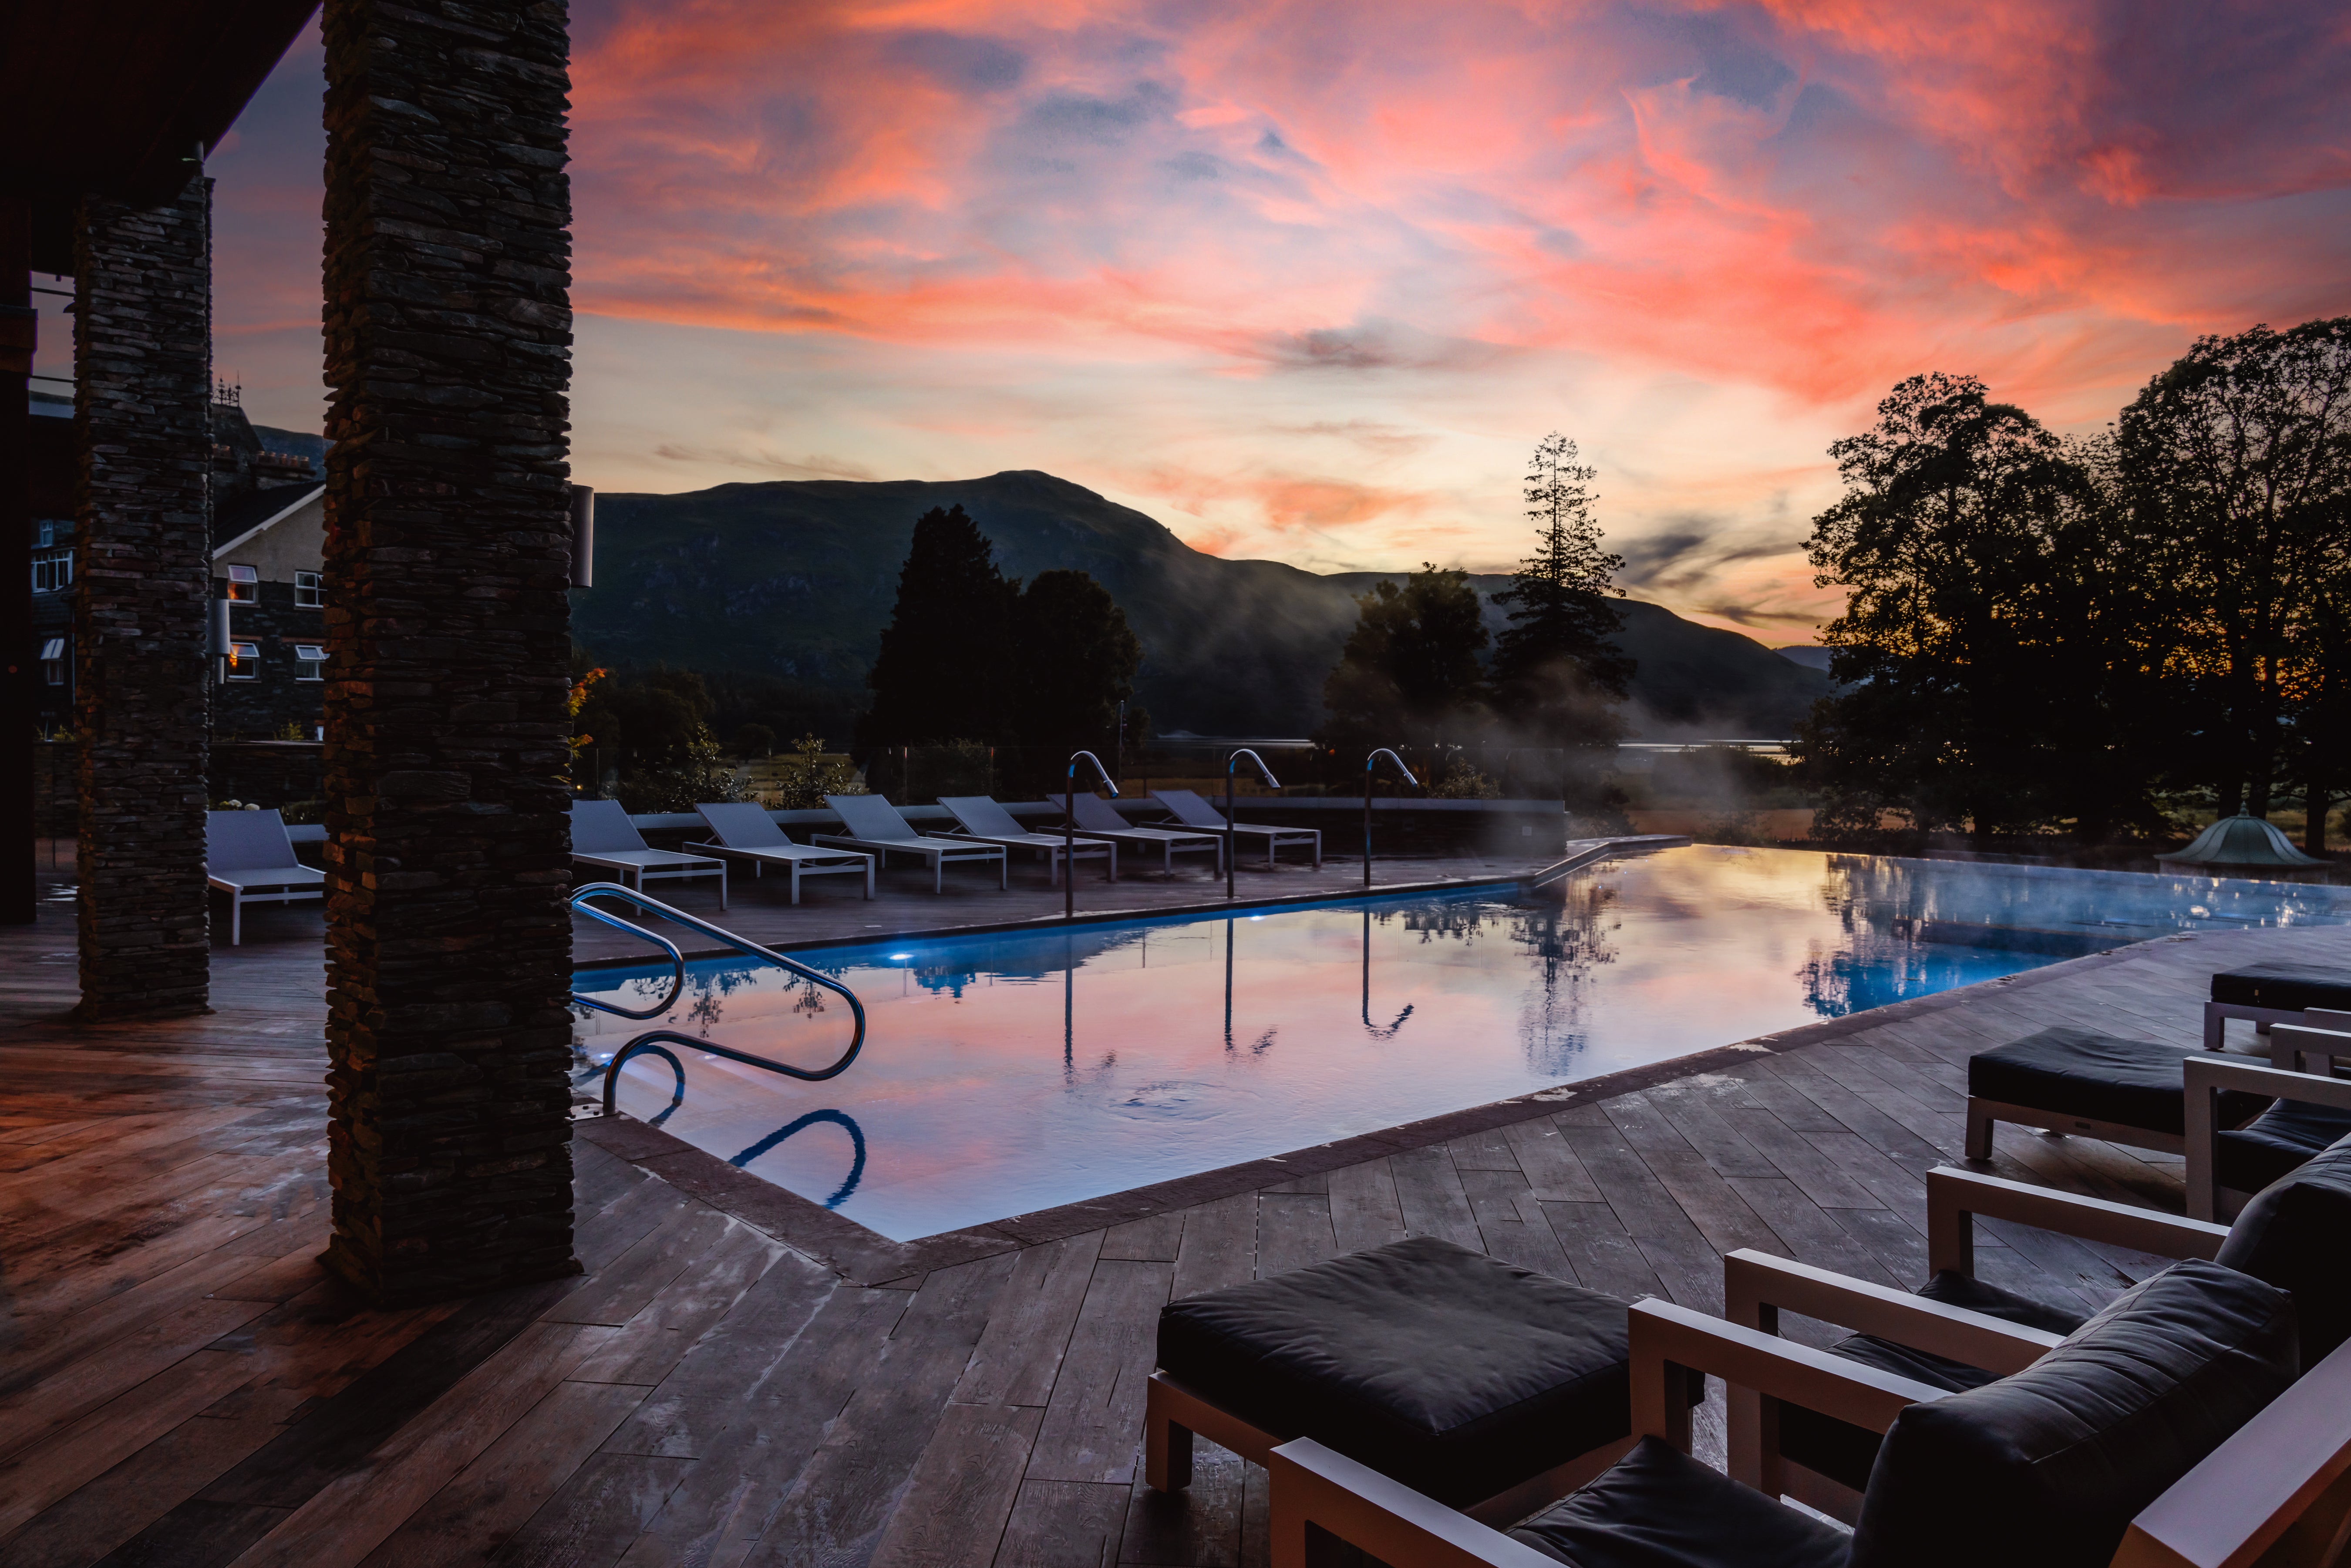 Watch the sunset as you relax in the outdoor pool